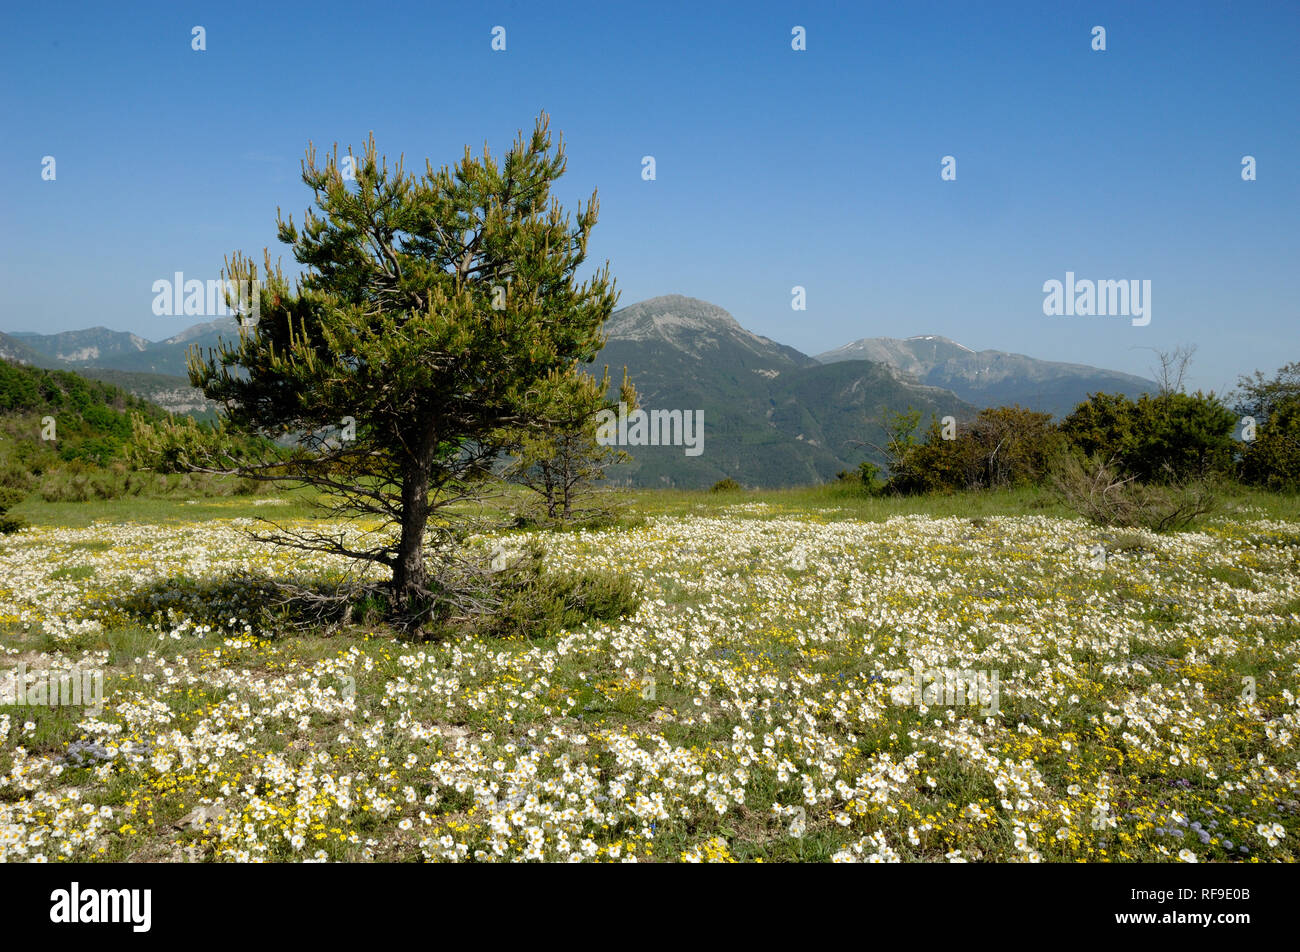 Wild Flower Meadow or Spring Meadow, including White Rock-rose, Helianthemum apenninum, Courchons in the Verdon Regional Park Provence France Stock Photo